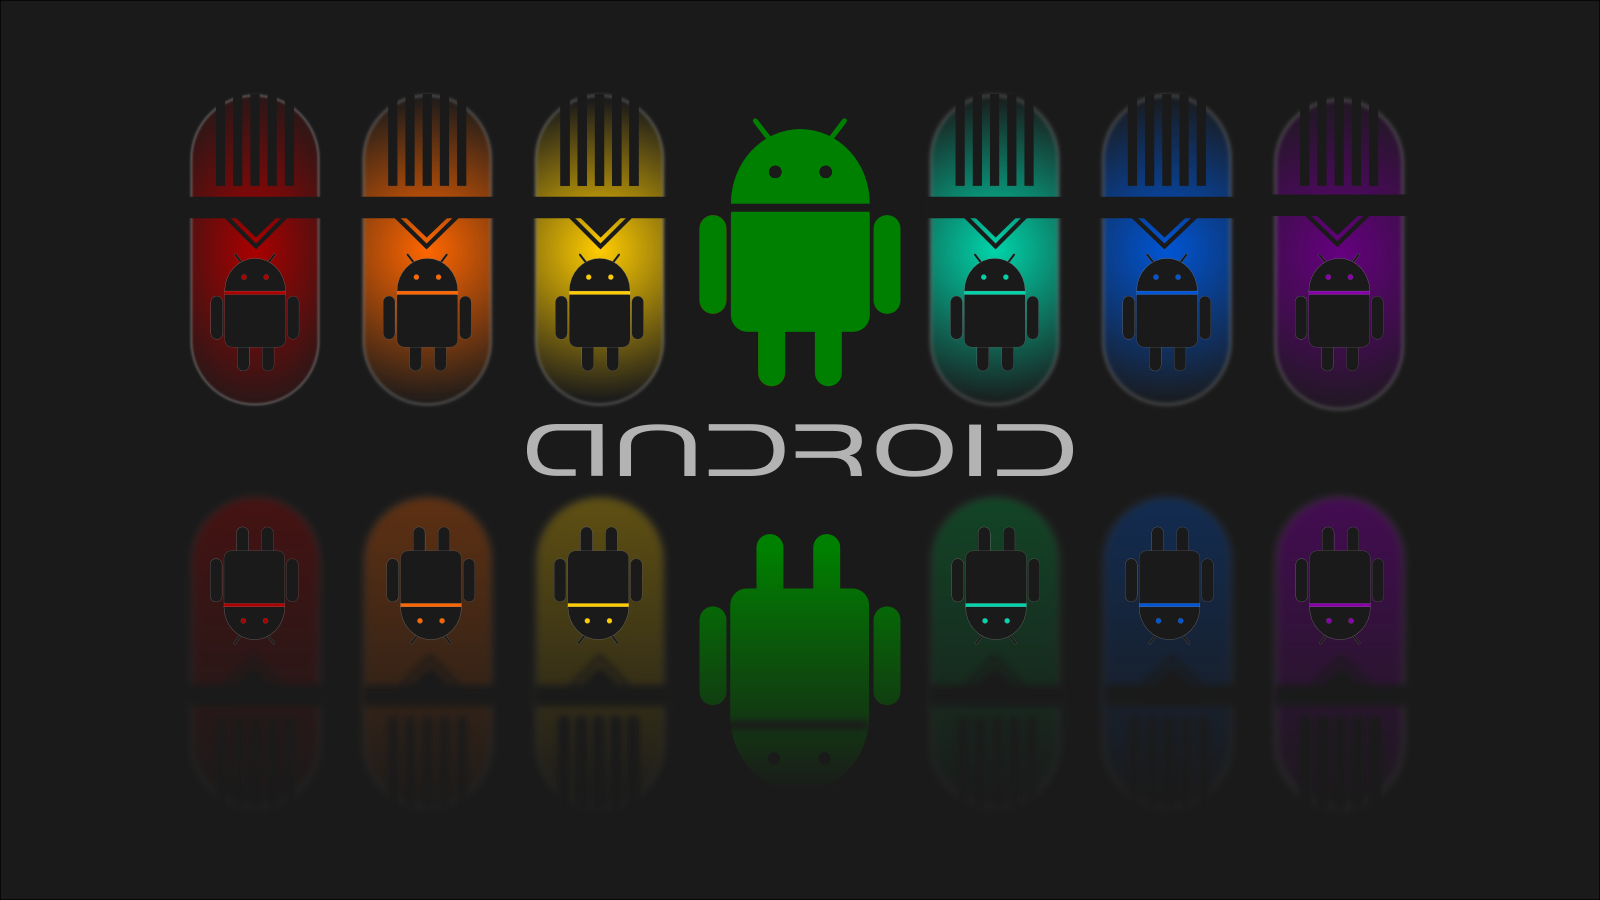 Android control remoto